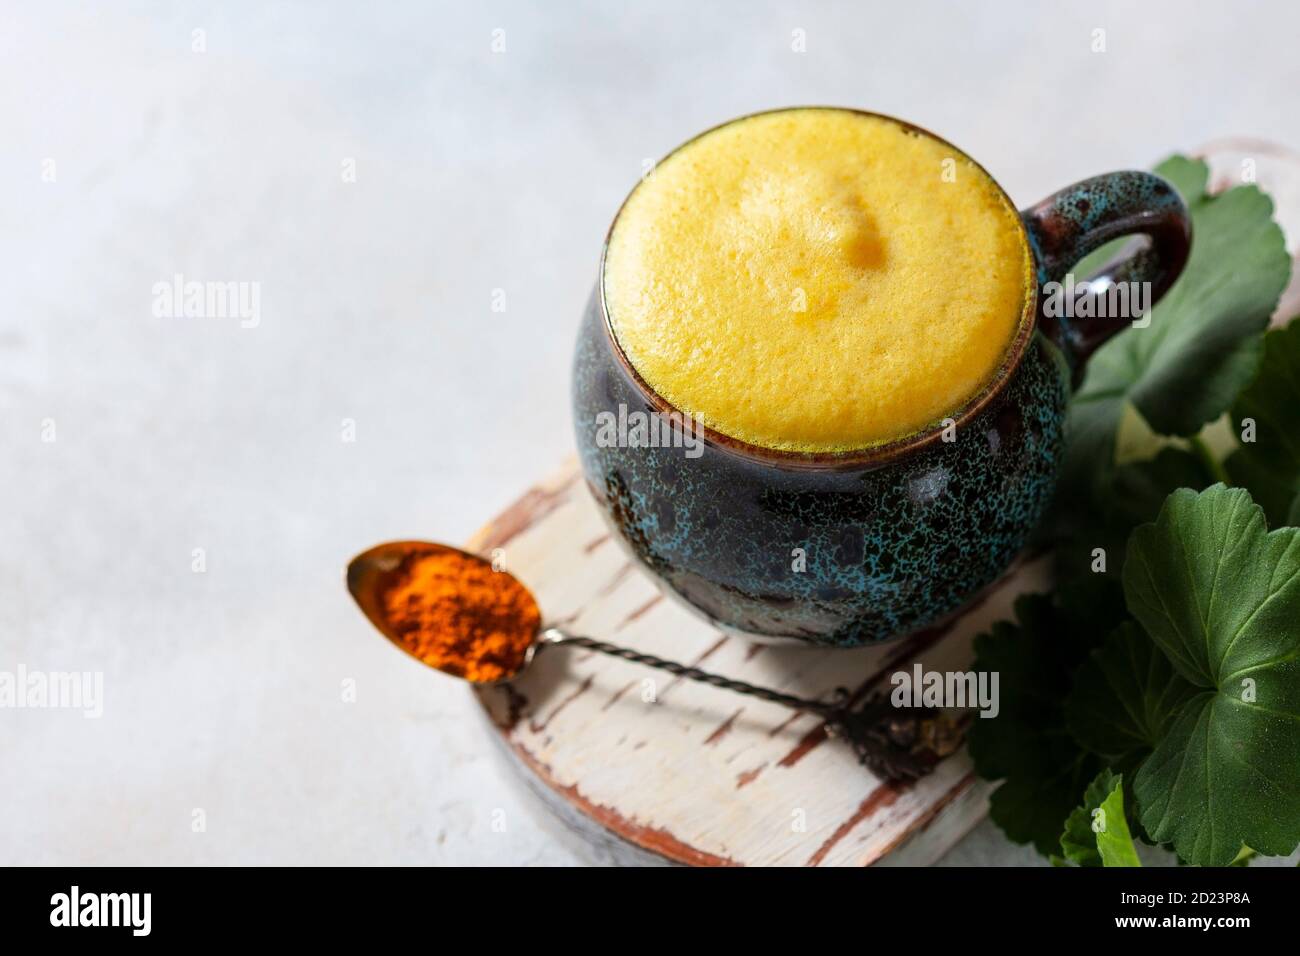 Cup of ayurvedic drink golden almond milk or turmeric latte with curcuma powder on white background. Natural detox beverage with spices. Stock Photo